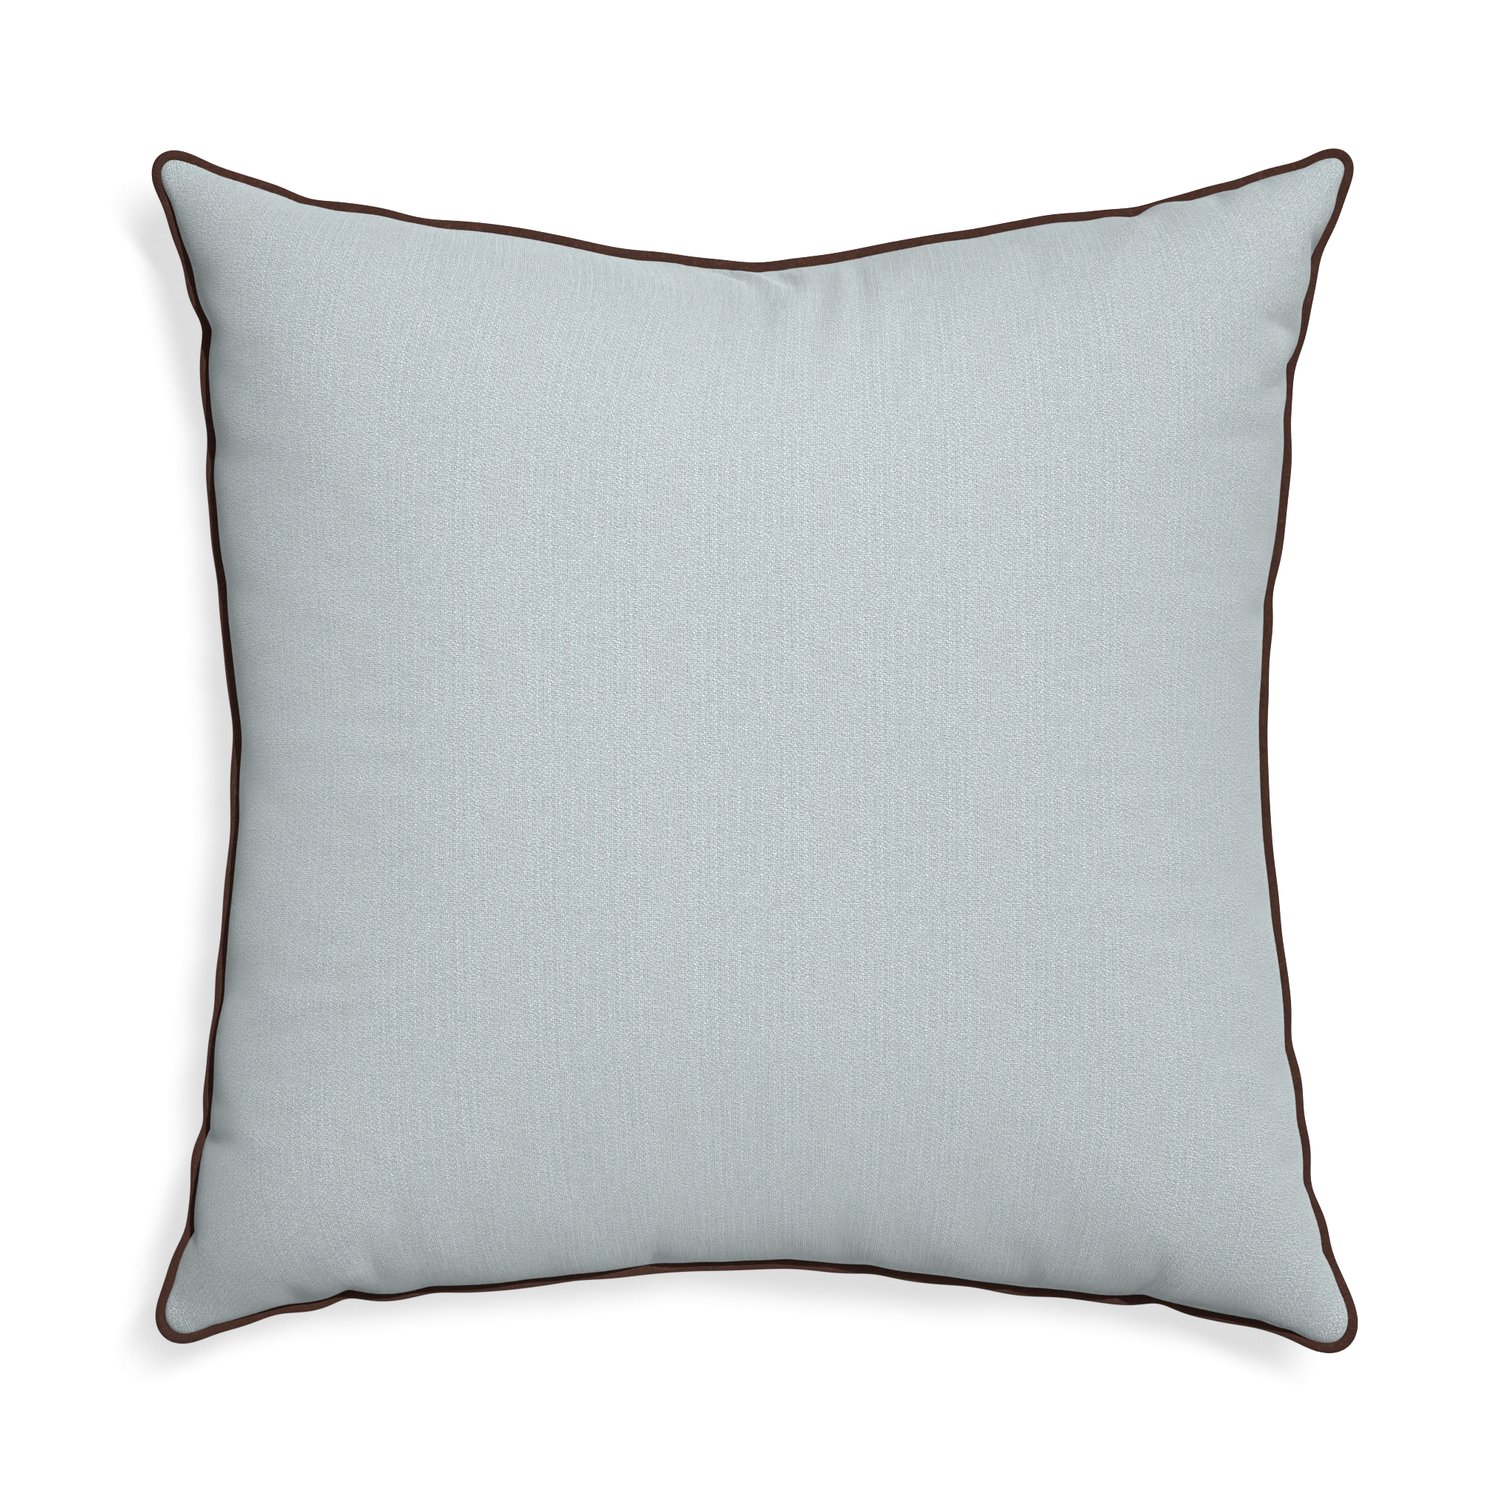 Euro-sham sea custom grey bluepillow with w piping on white background